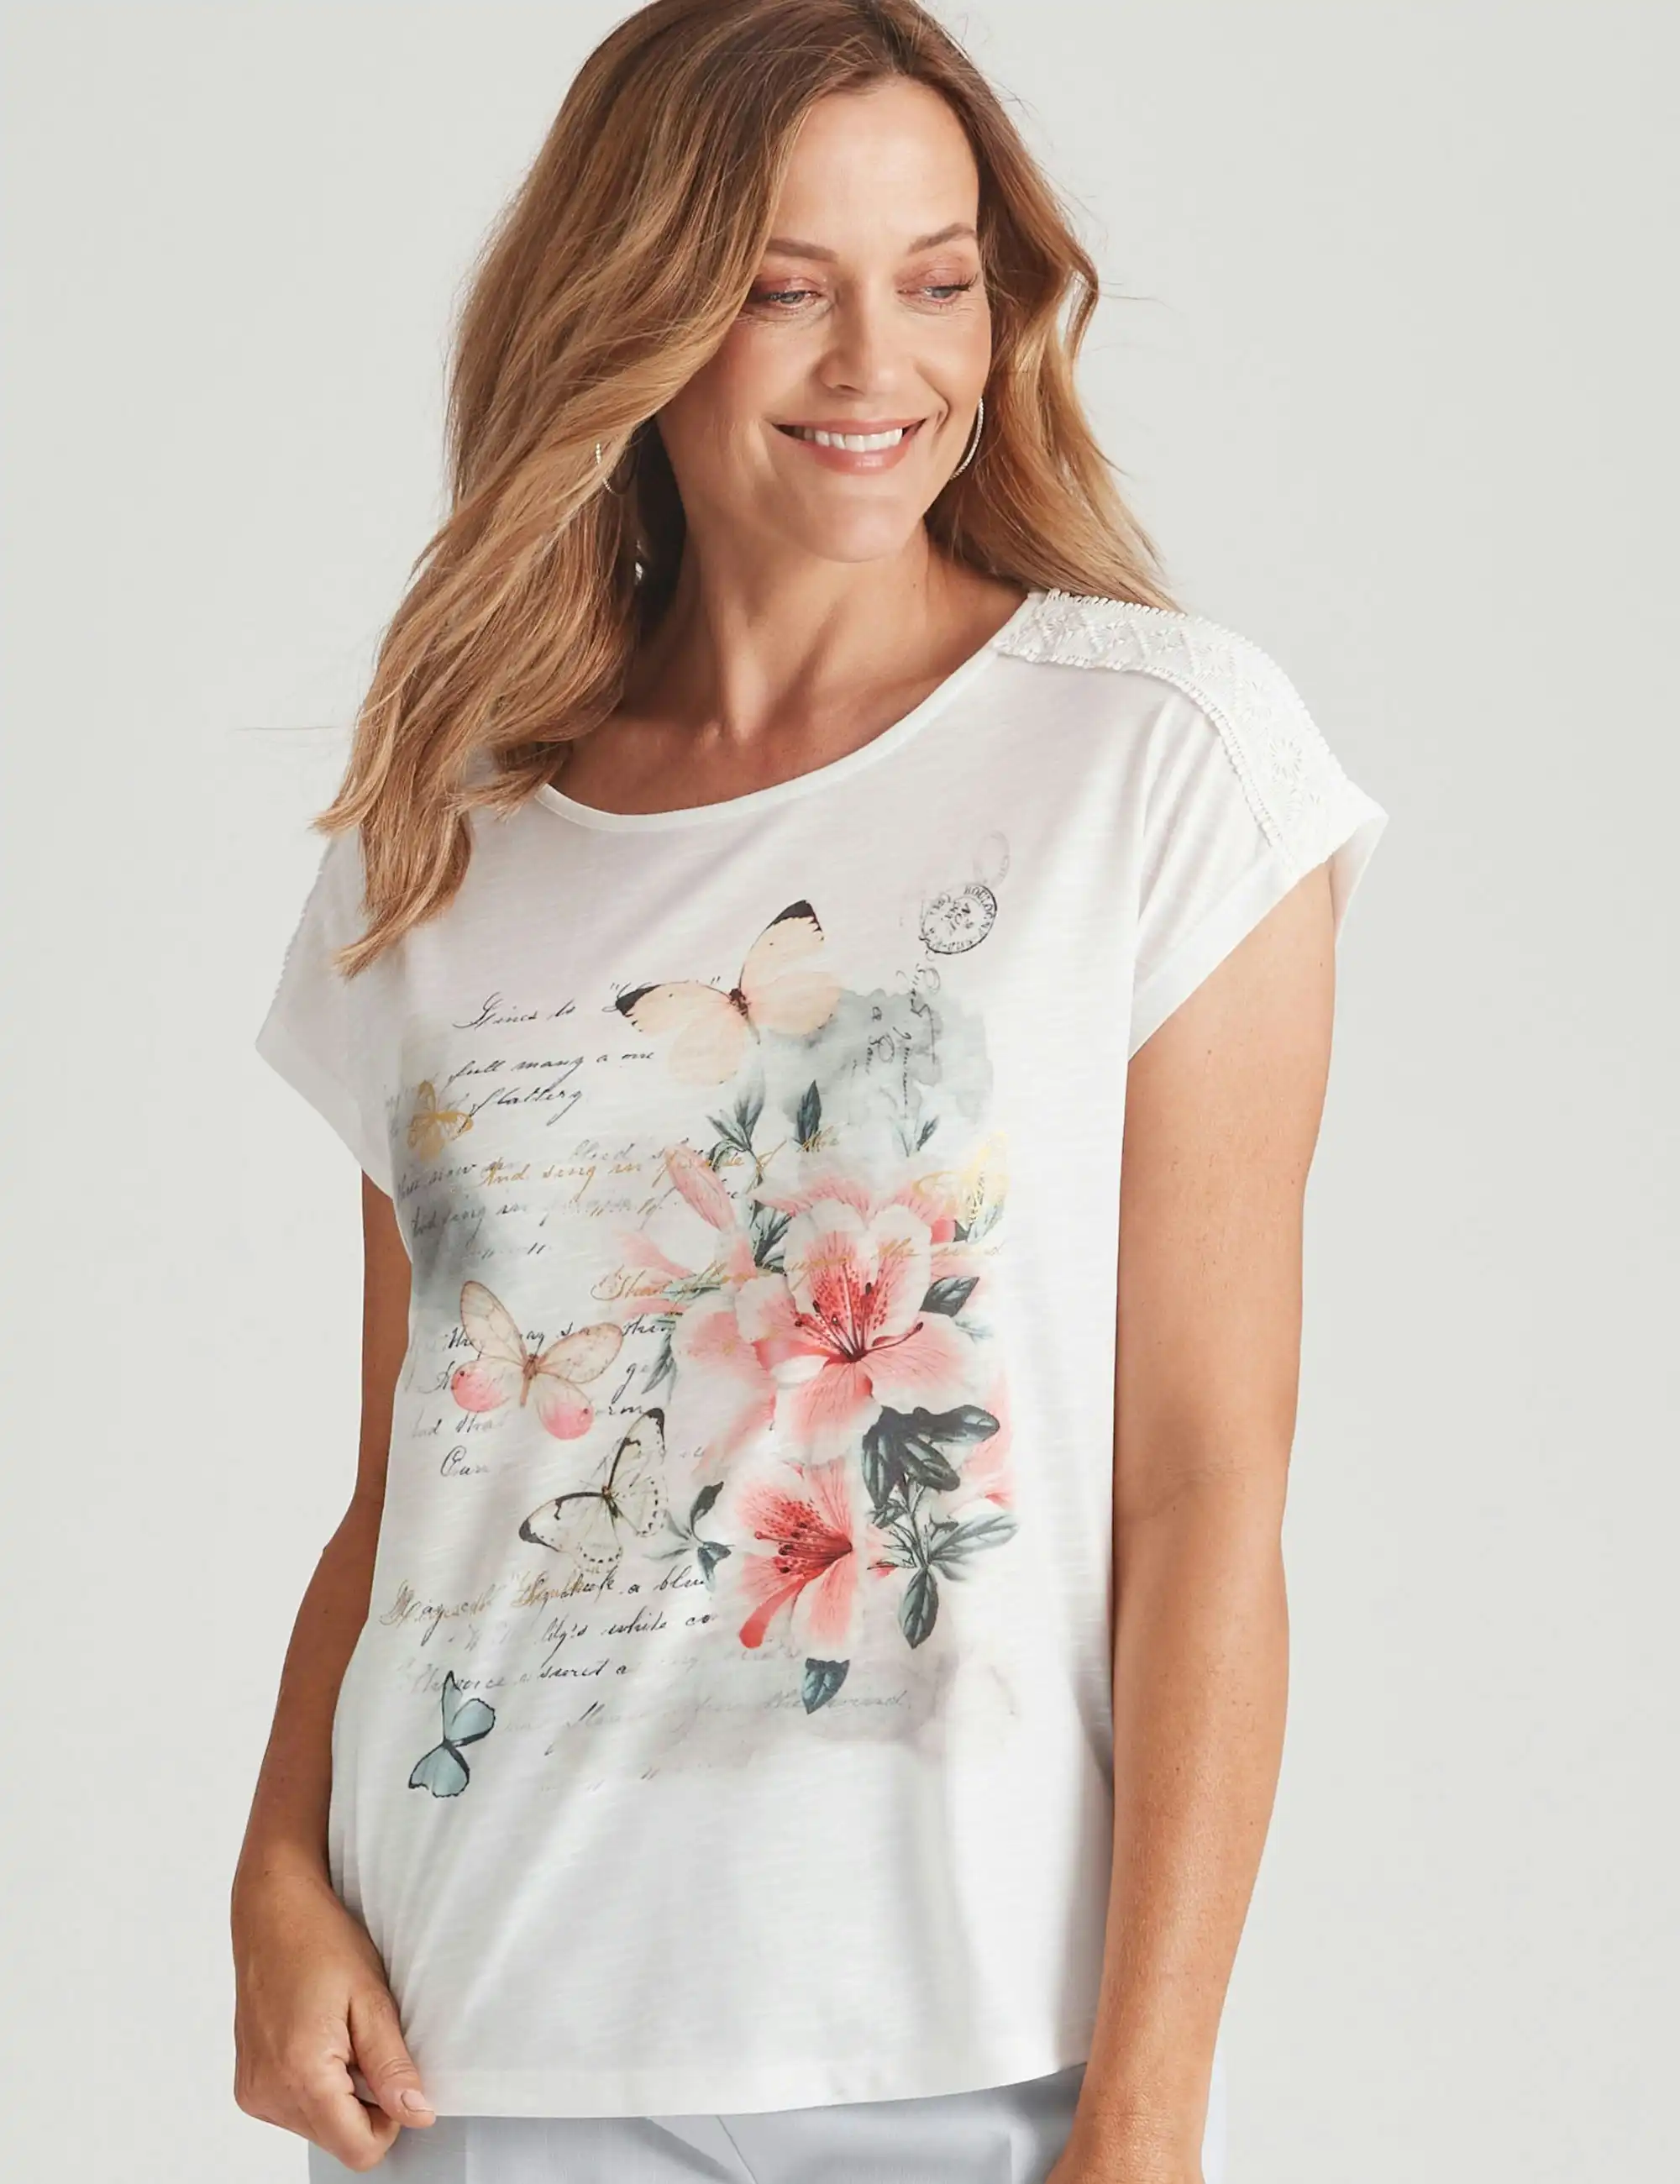 Millers Ended Sleeve Graphic Placement With Lace Trim Top (Butterfly Placement)